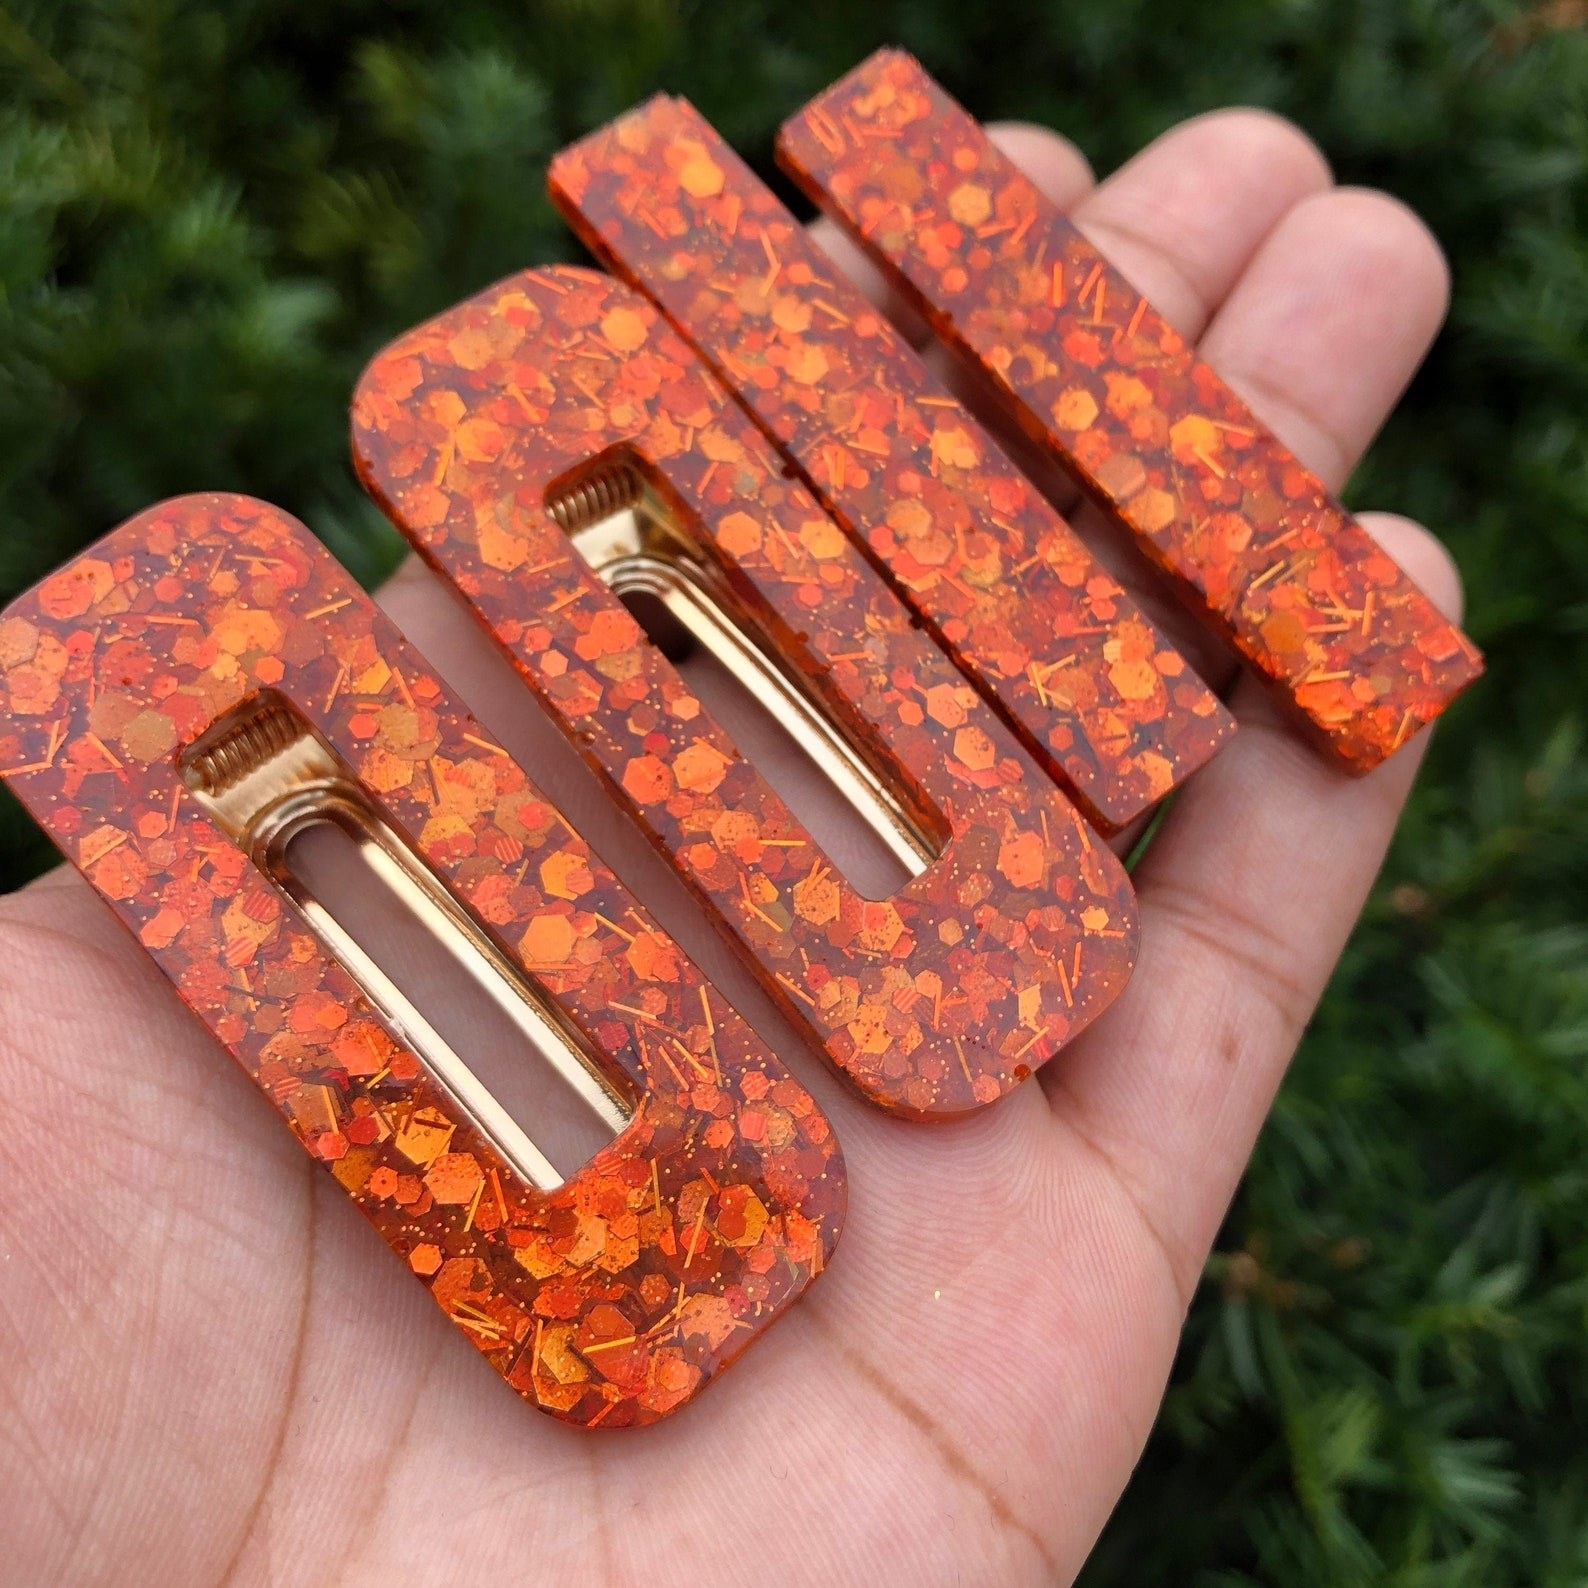 Model holding four hair clips with different shapes and a burnt orange, gold, and brown leaf pattern on them